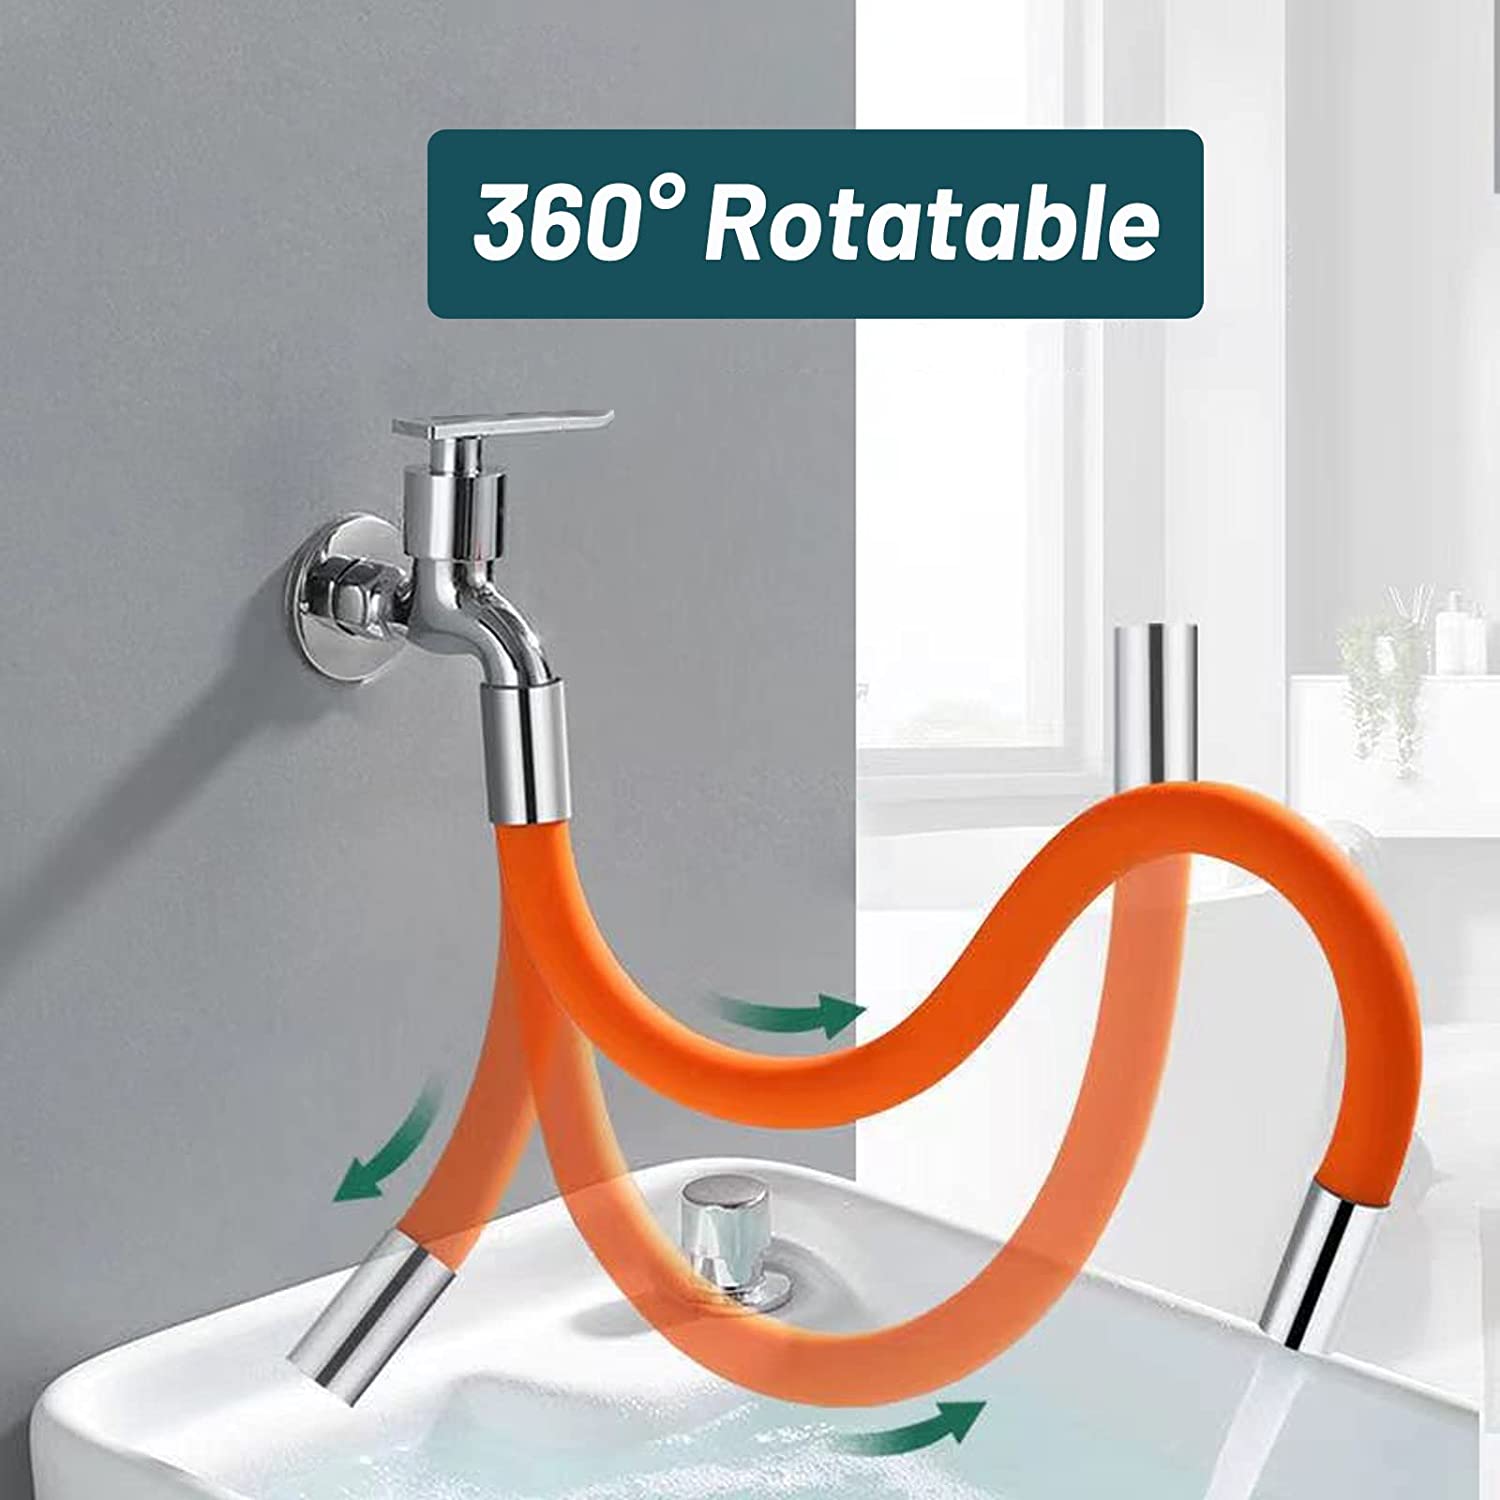 Flexible Faucet Extender installed on a faucet rotating in 360°